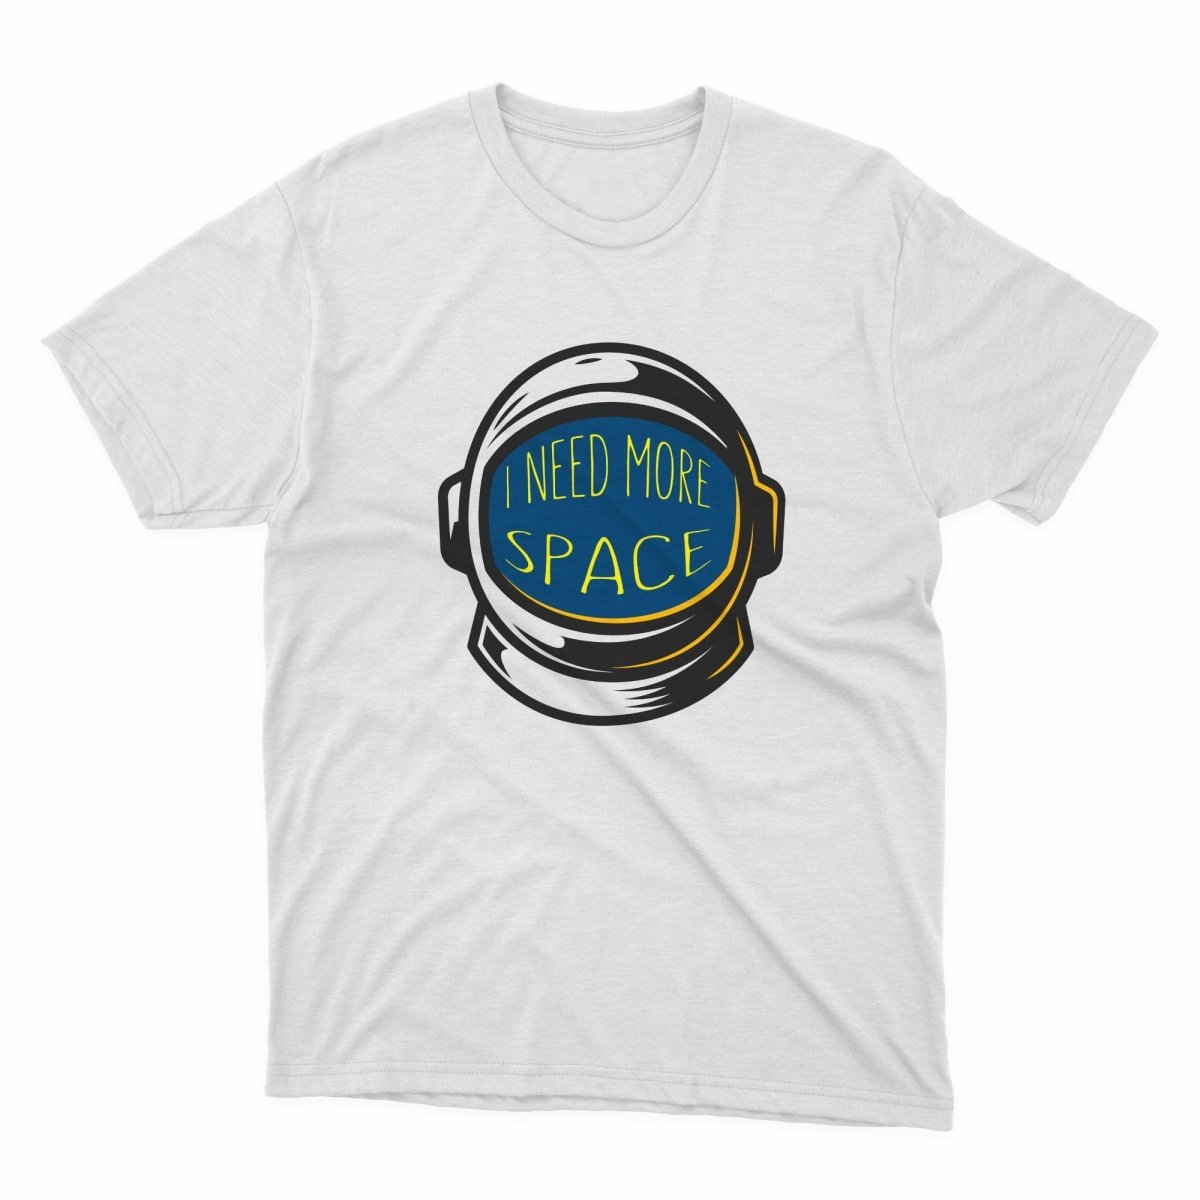 I Need More Space Shirt - stickerbullI Need More Space ShirtShirtsPrintifystickerbull74984491253127634987WhiteSa white t - shirt with the words need more space on it